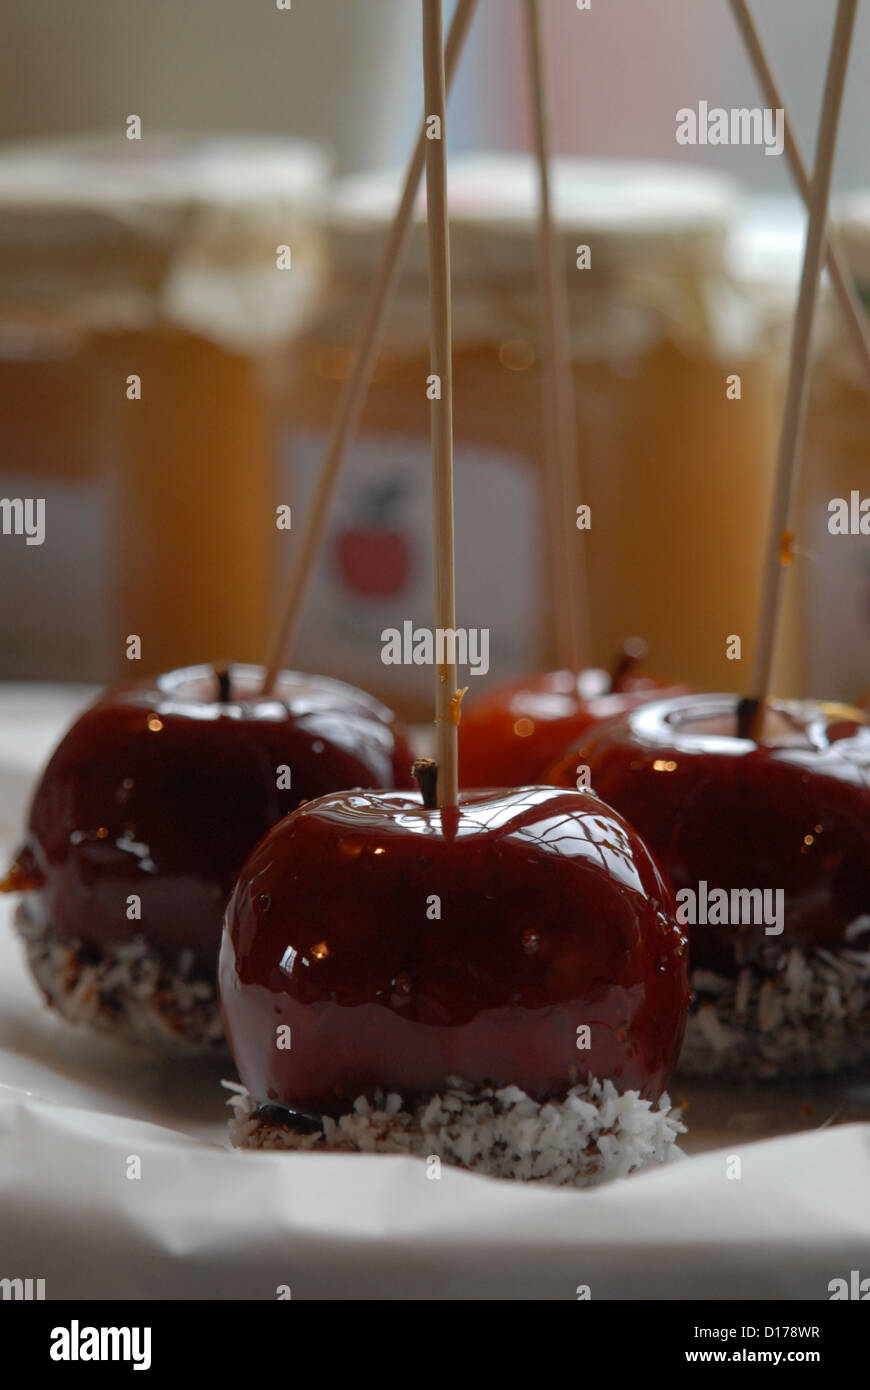 Candy apples. Stock Photo